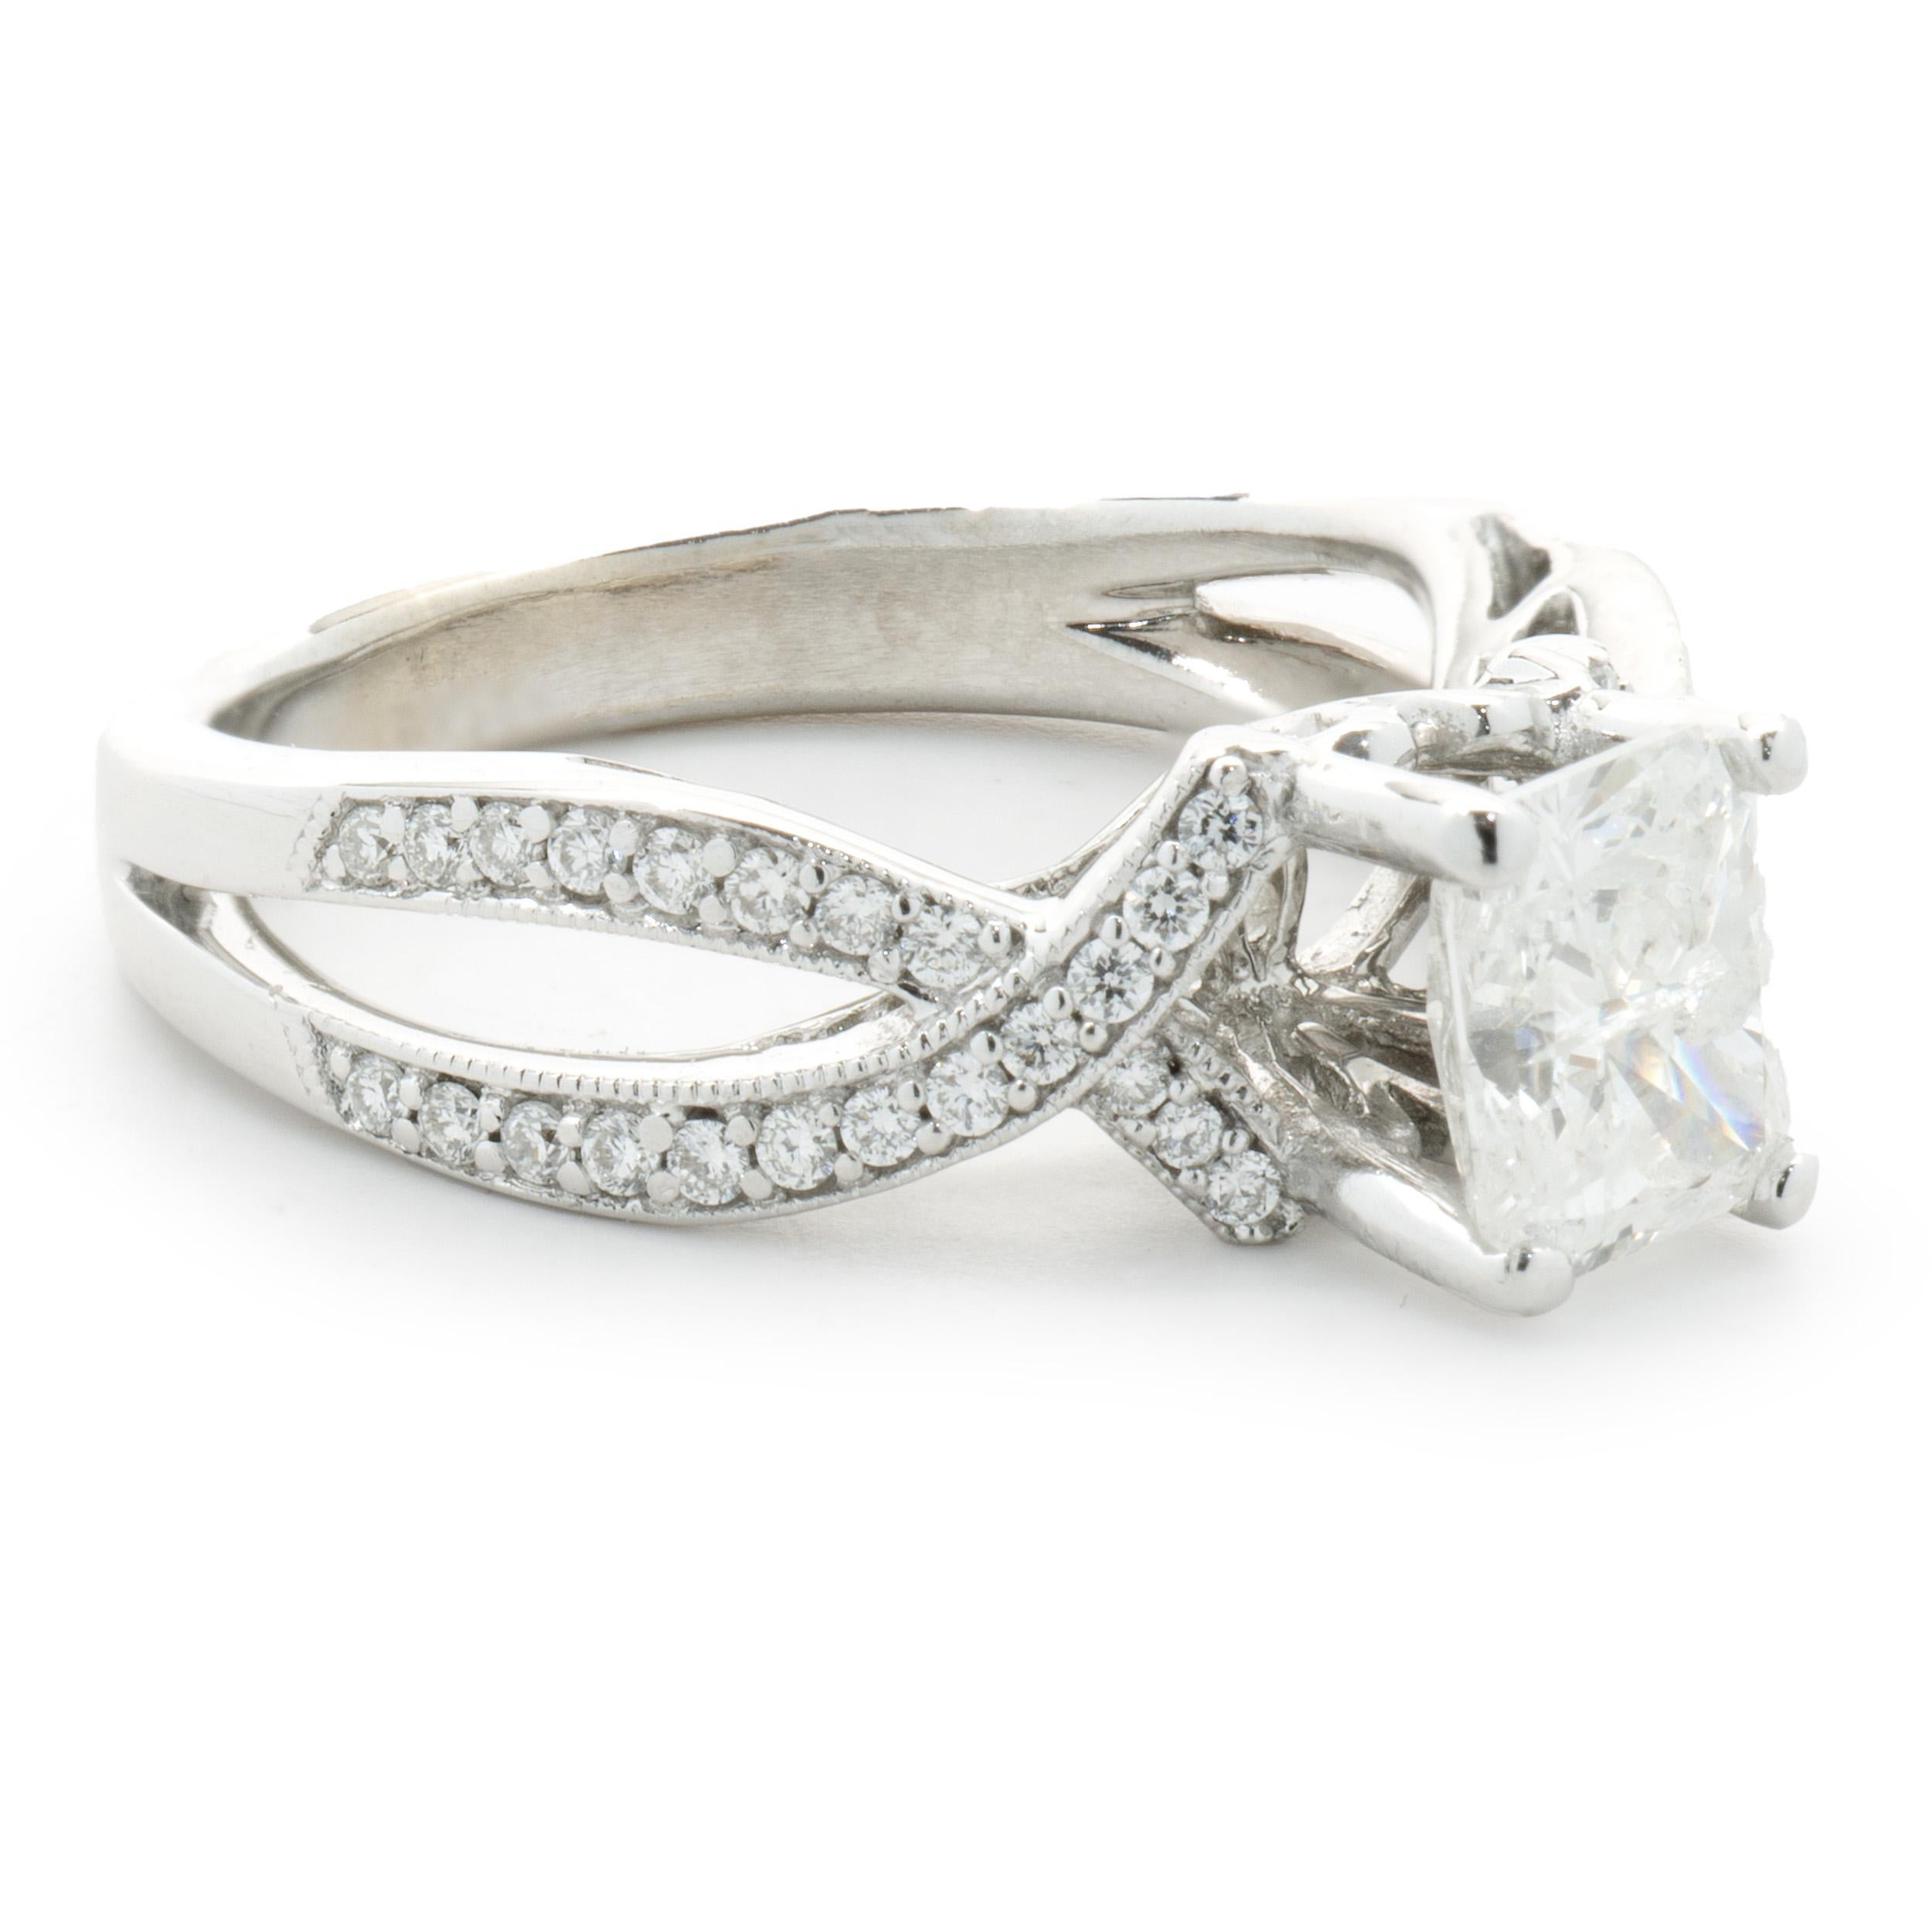 14 Karat White Gold Radiant Cut Diamond Engagement Ring In Excellent Condition For Sale In Scottsdale, AZ